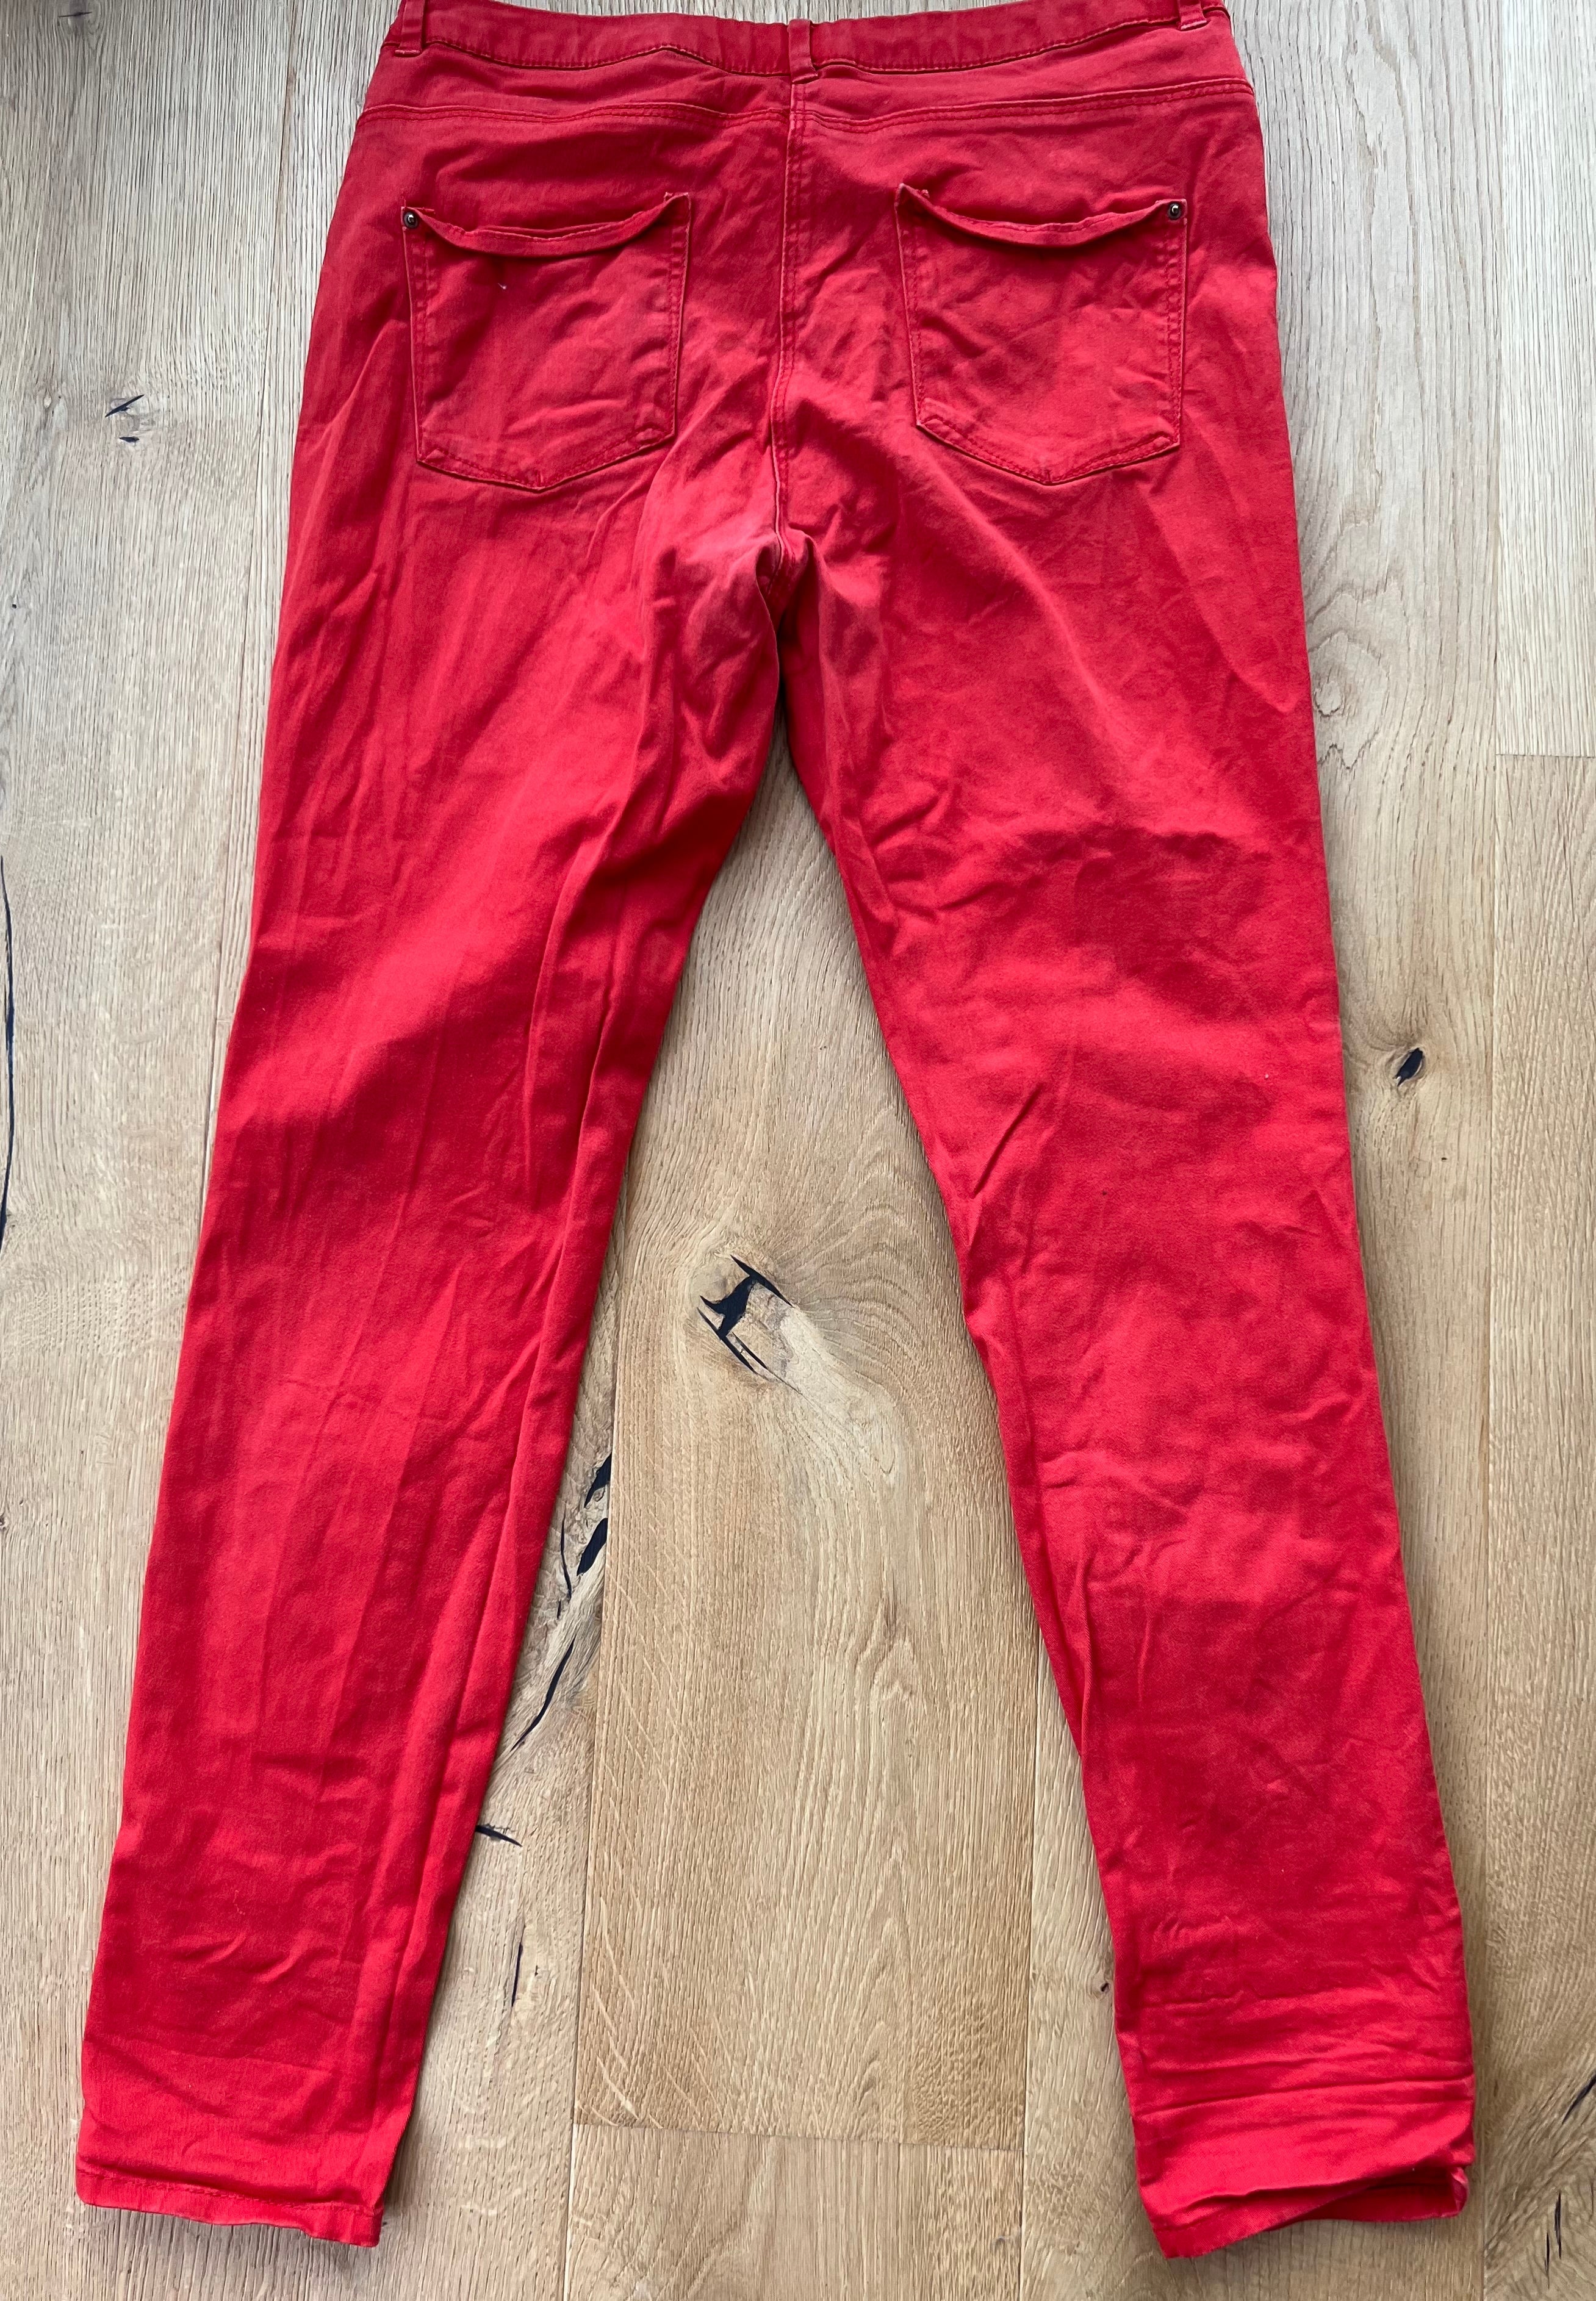 H&M Skinny tomato red jeans